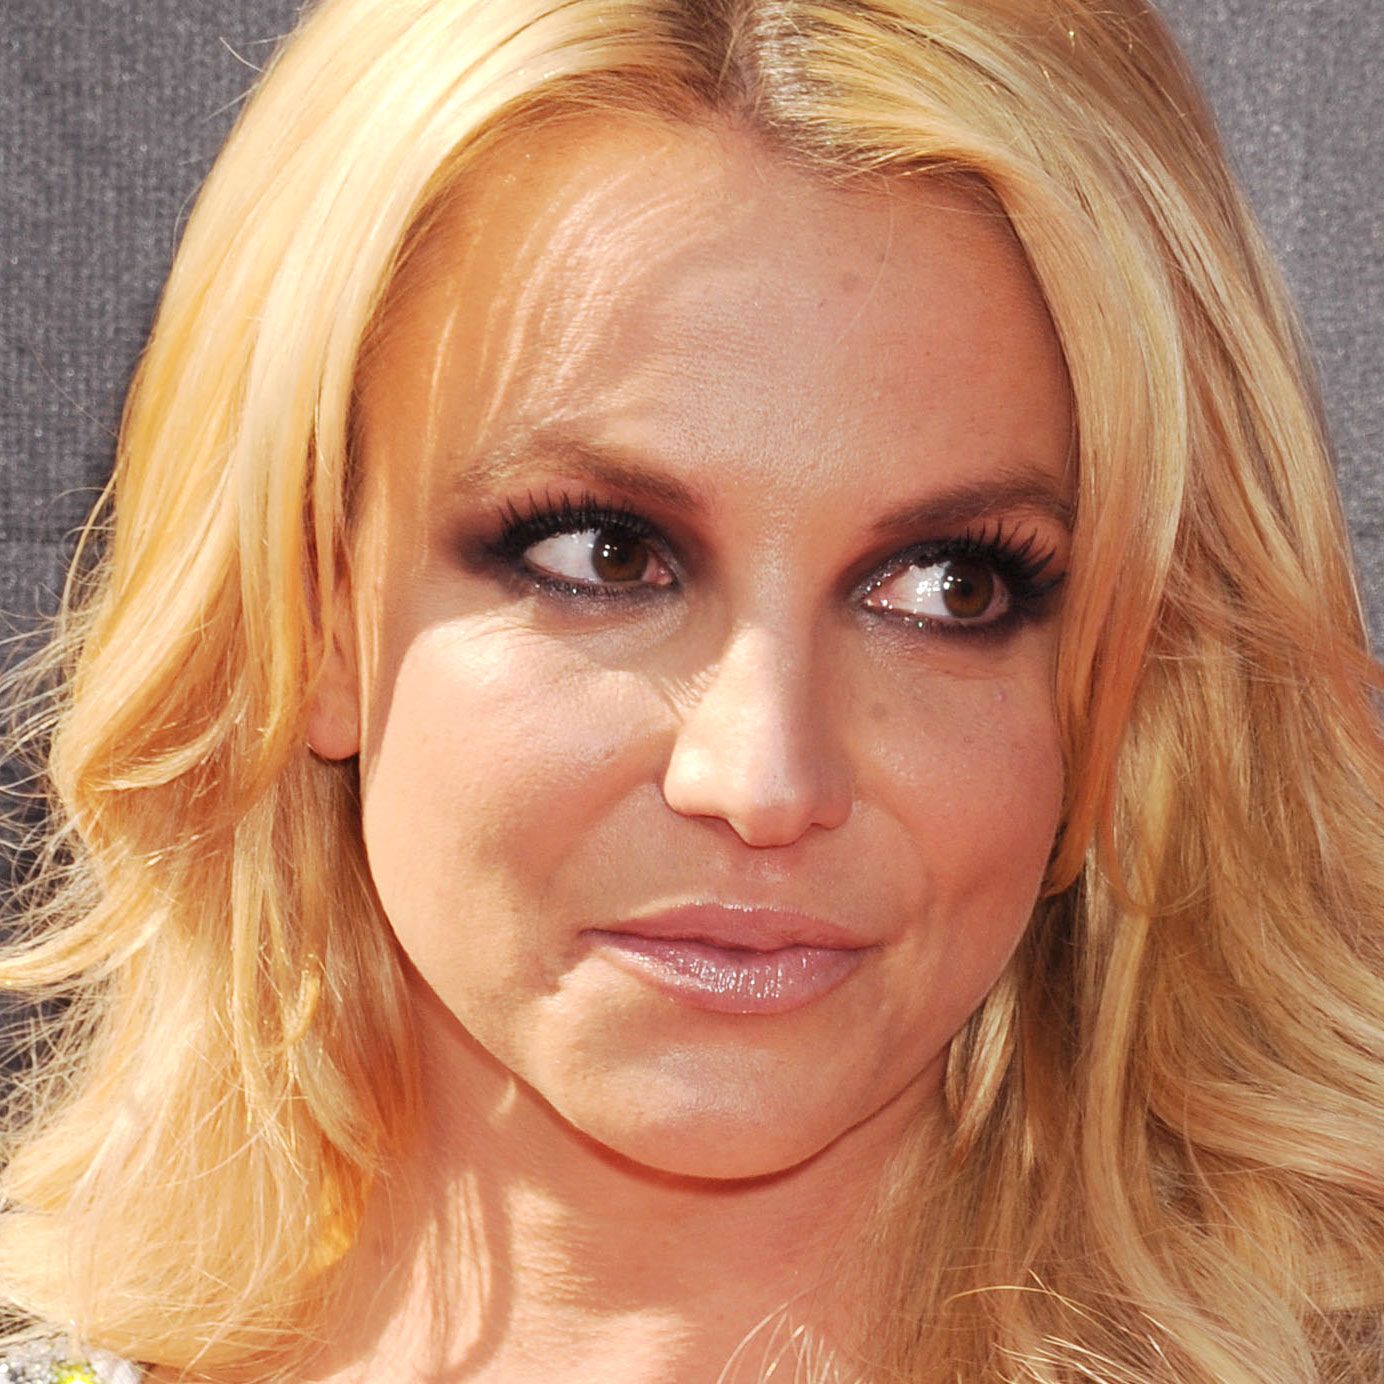 Britney Spears Calls Out Father, Sister in Instagram Posts